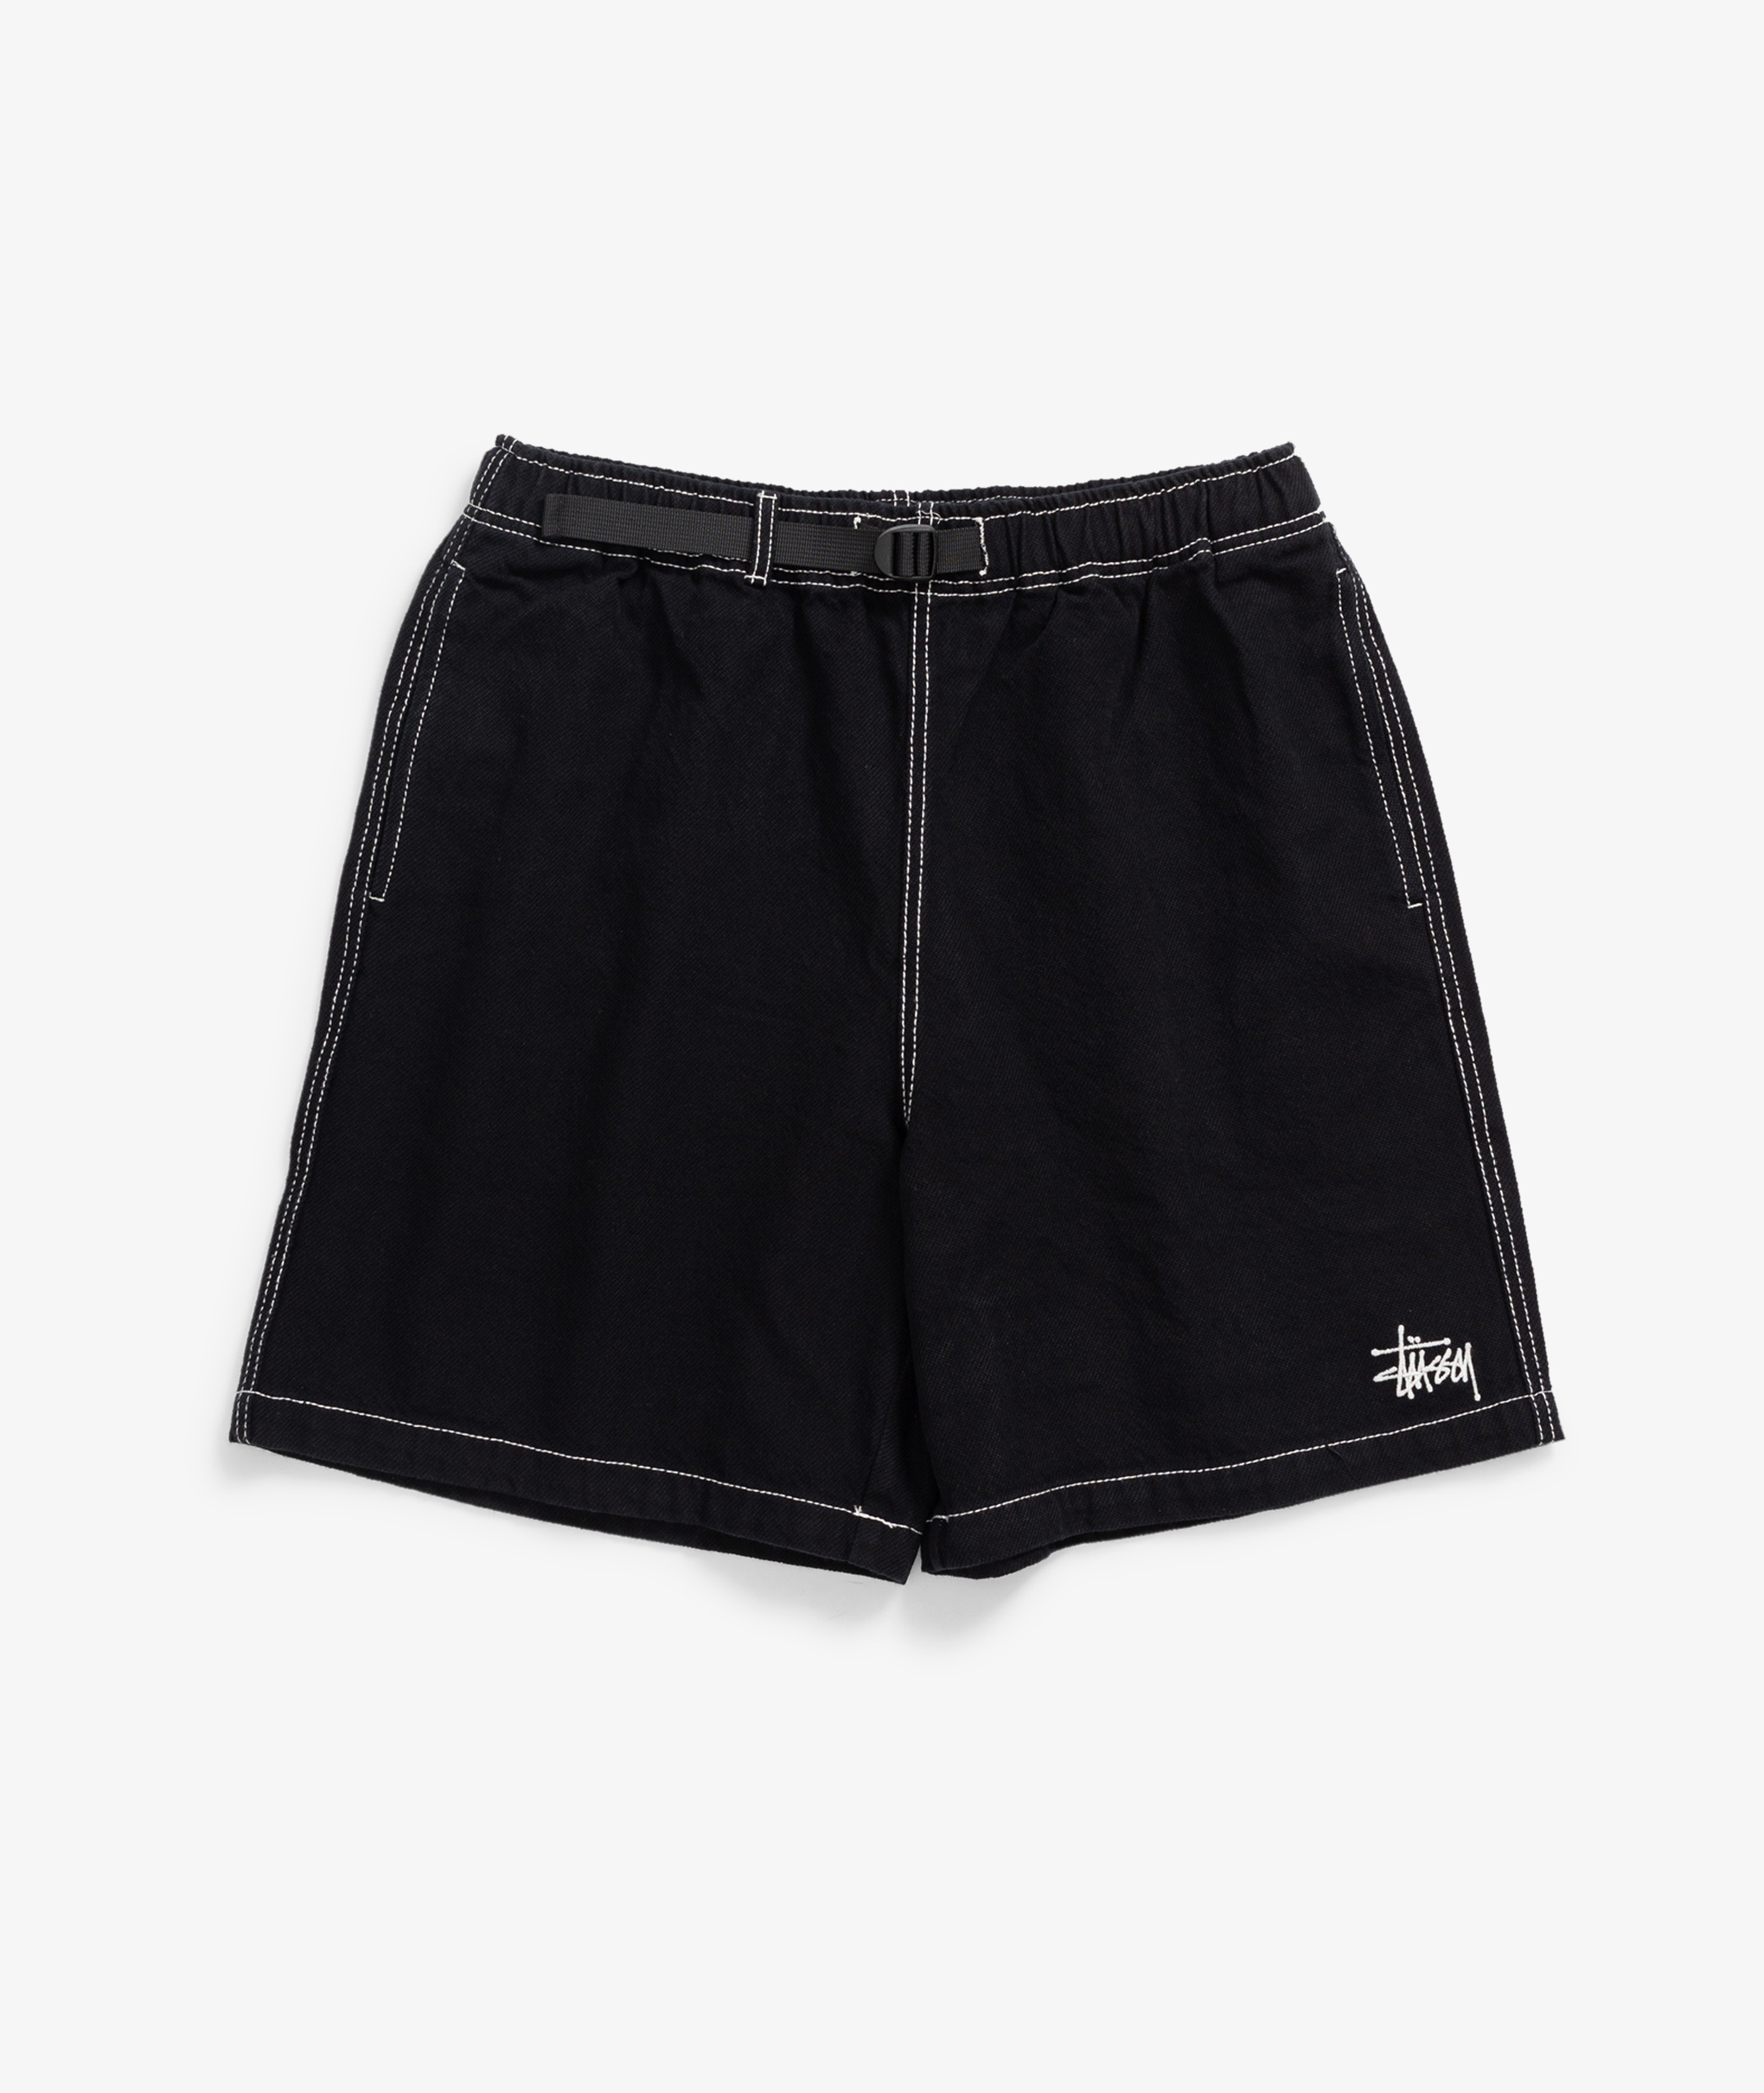 Norse Store | Shipping Worldwide - Stüssy Loose Twill Mountain 